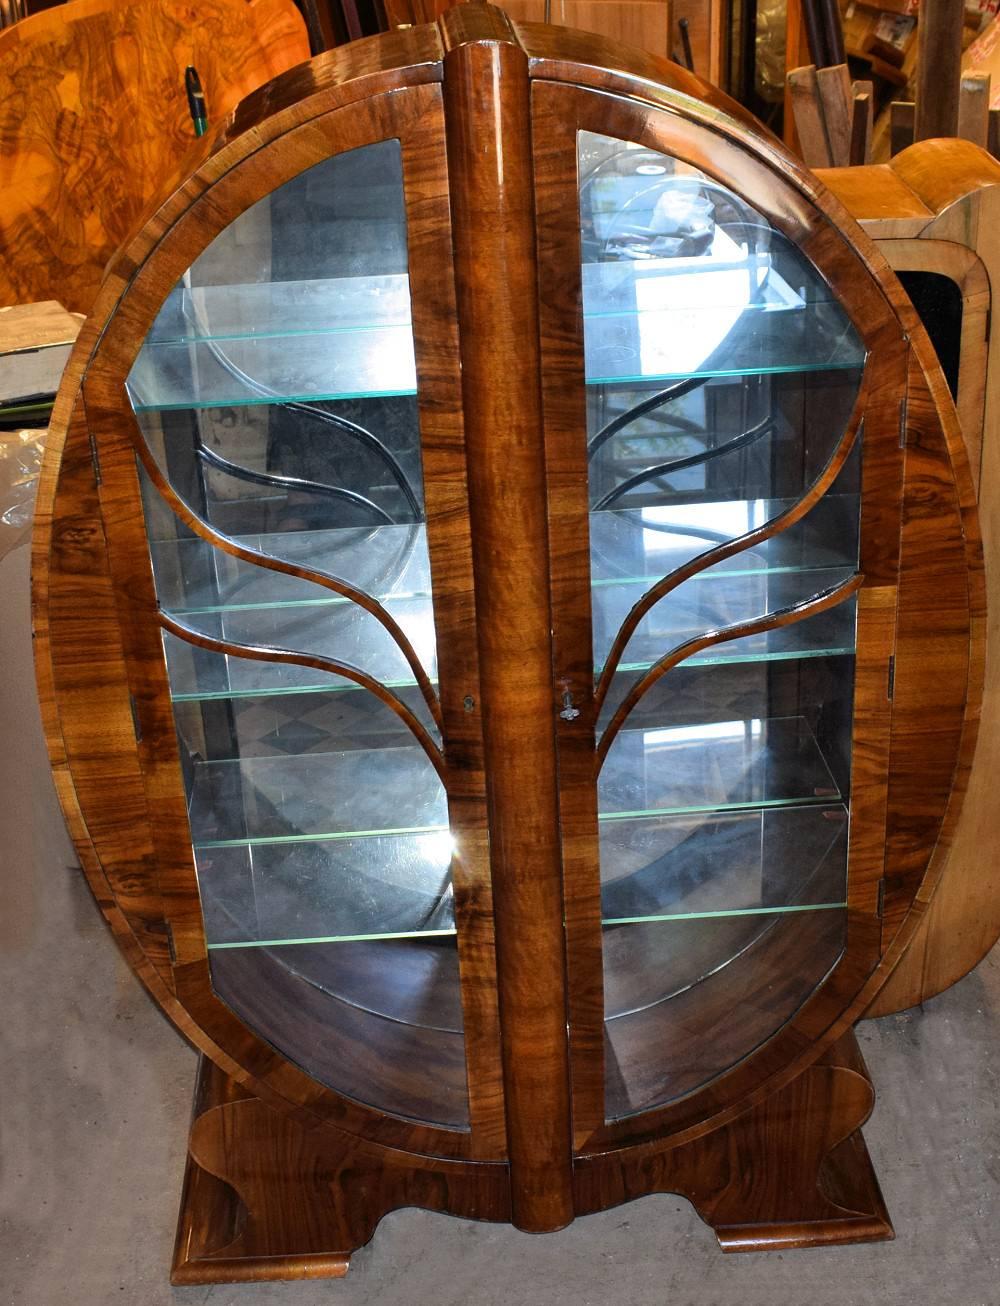 Very rare example of what is considered one of the more rare Art Deco display cabinets is this oval shaped heavily figured walnut veneered example. This particular one is even more scarce having still retained it's original mirror back, giving that